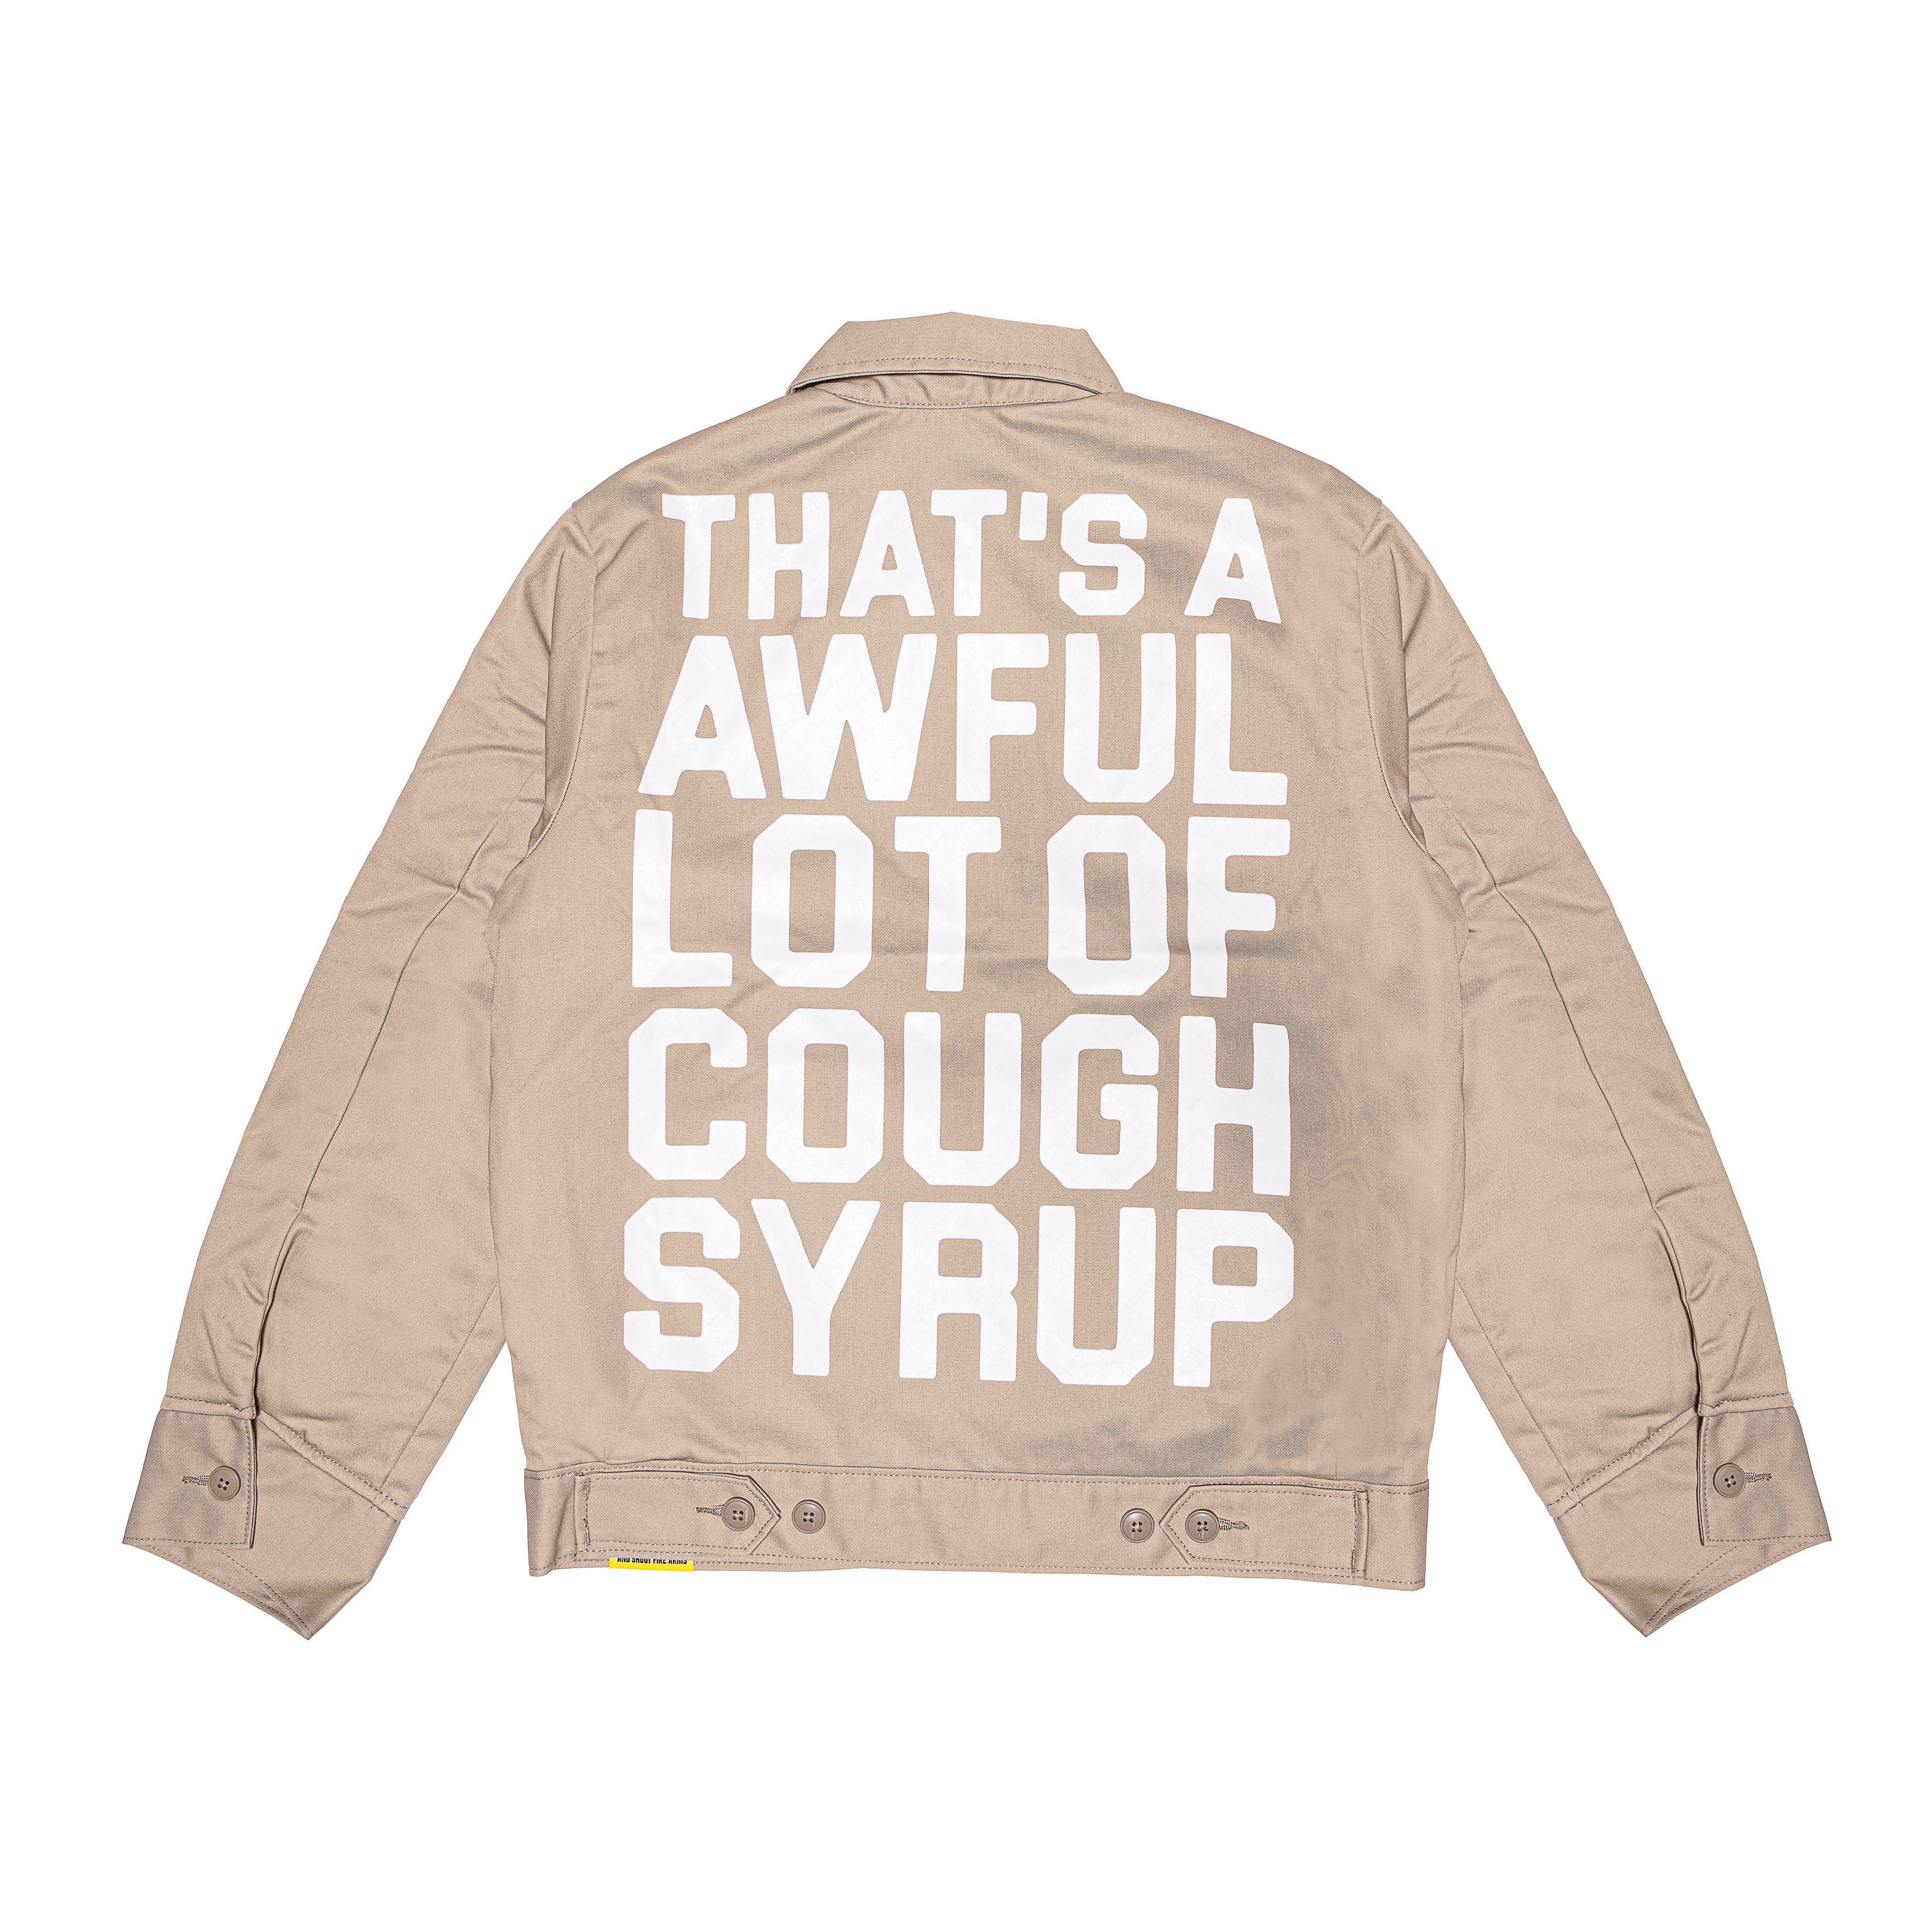 Cough Syrup Dickie's Jacket By Desto Dubb